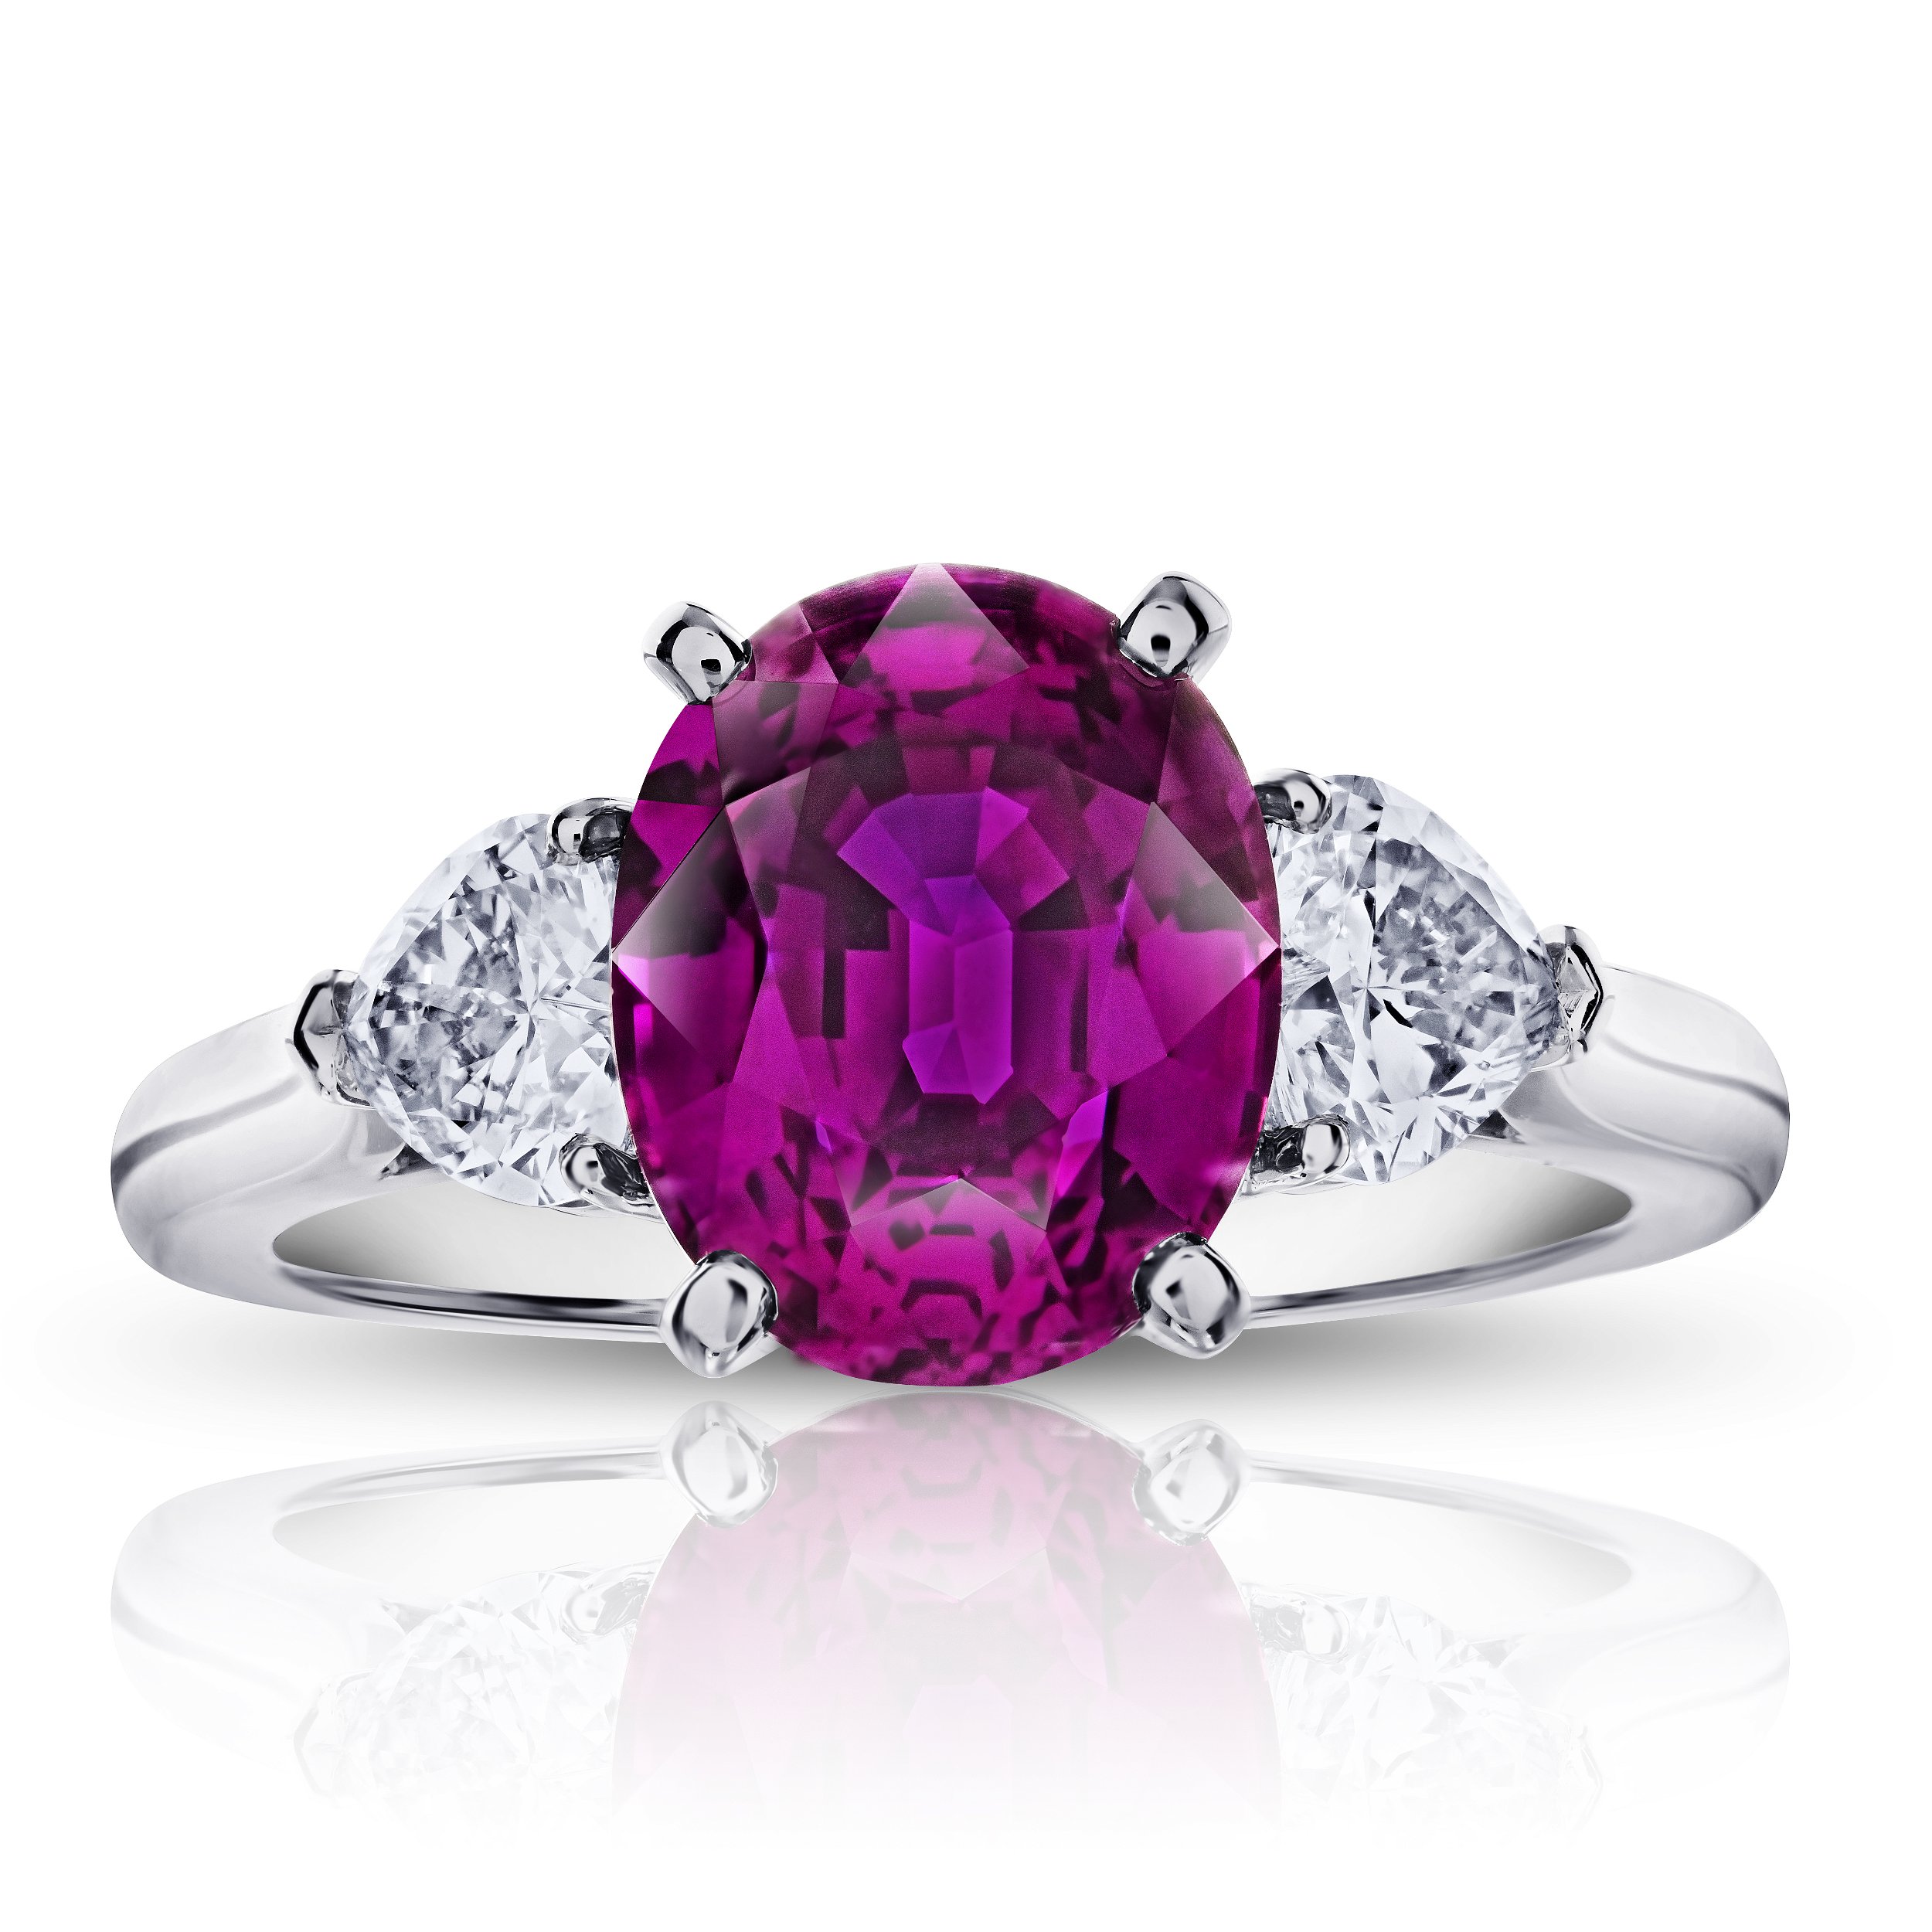 4.49ct Oval Pink Sapphire with Heart Shaped Diamonds in Platinum